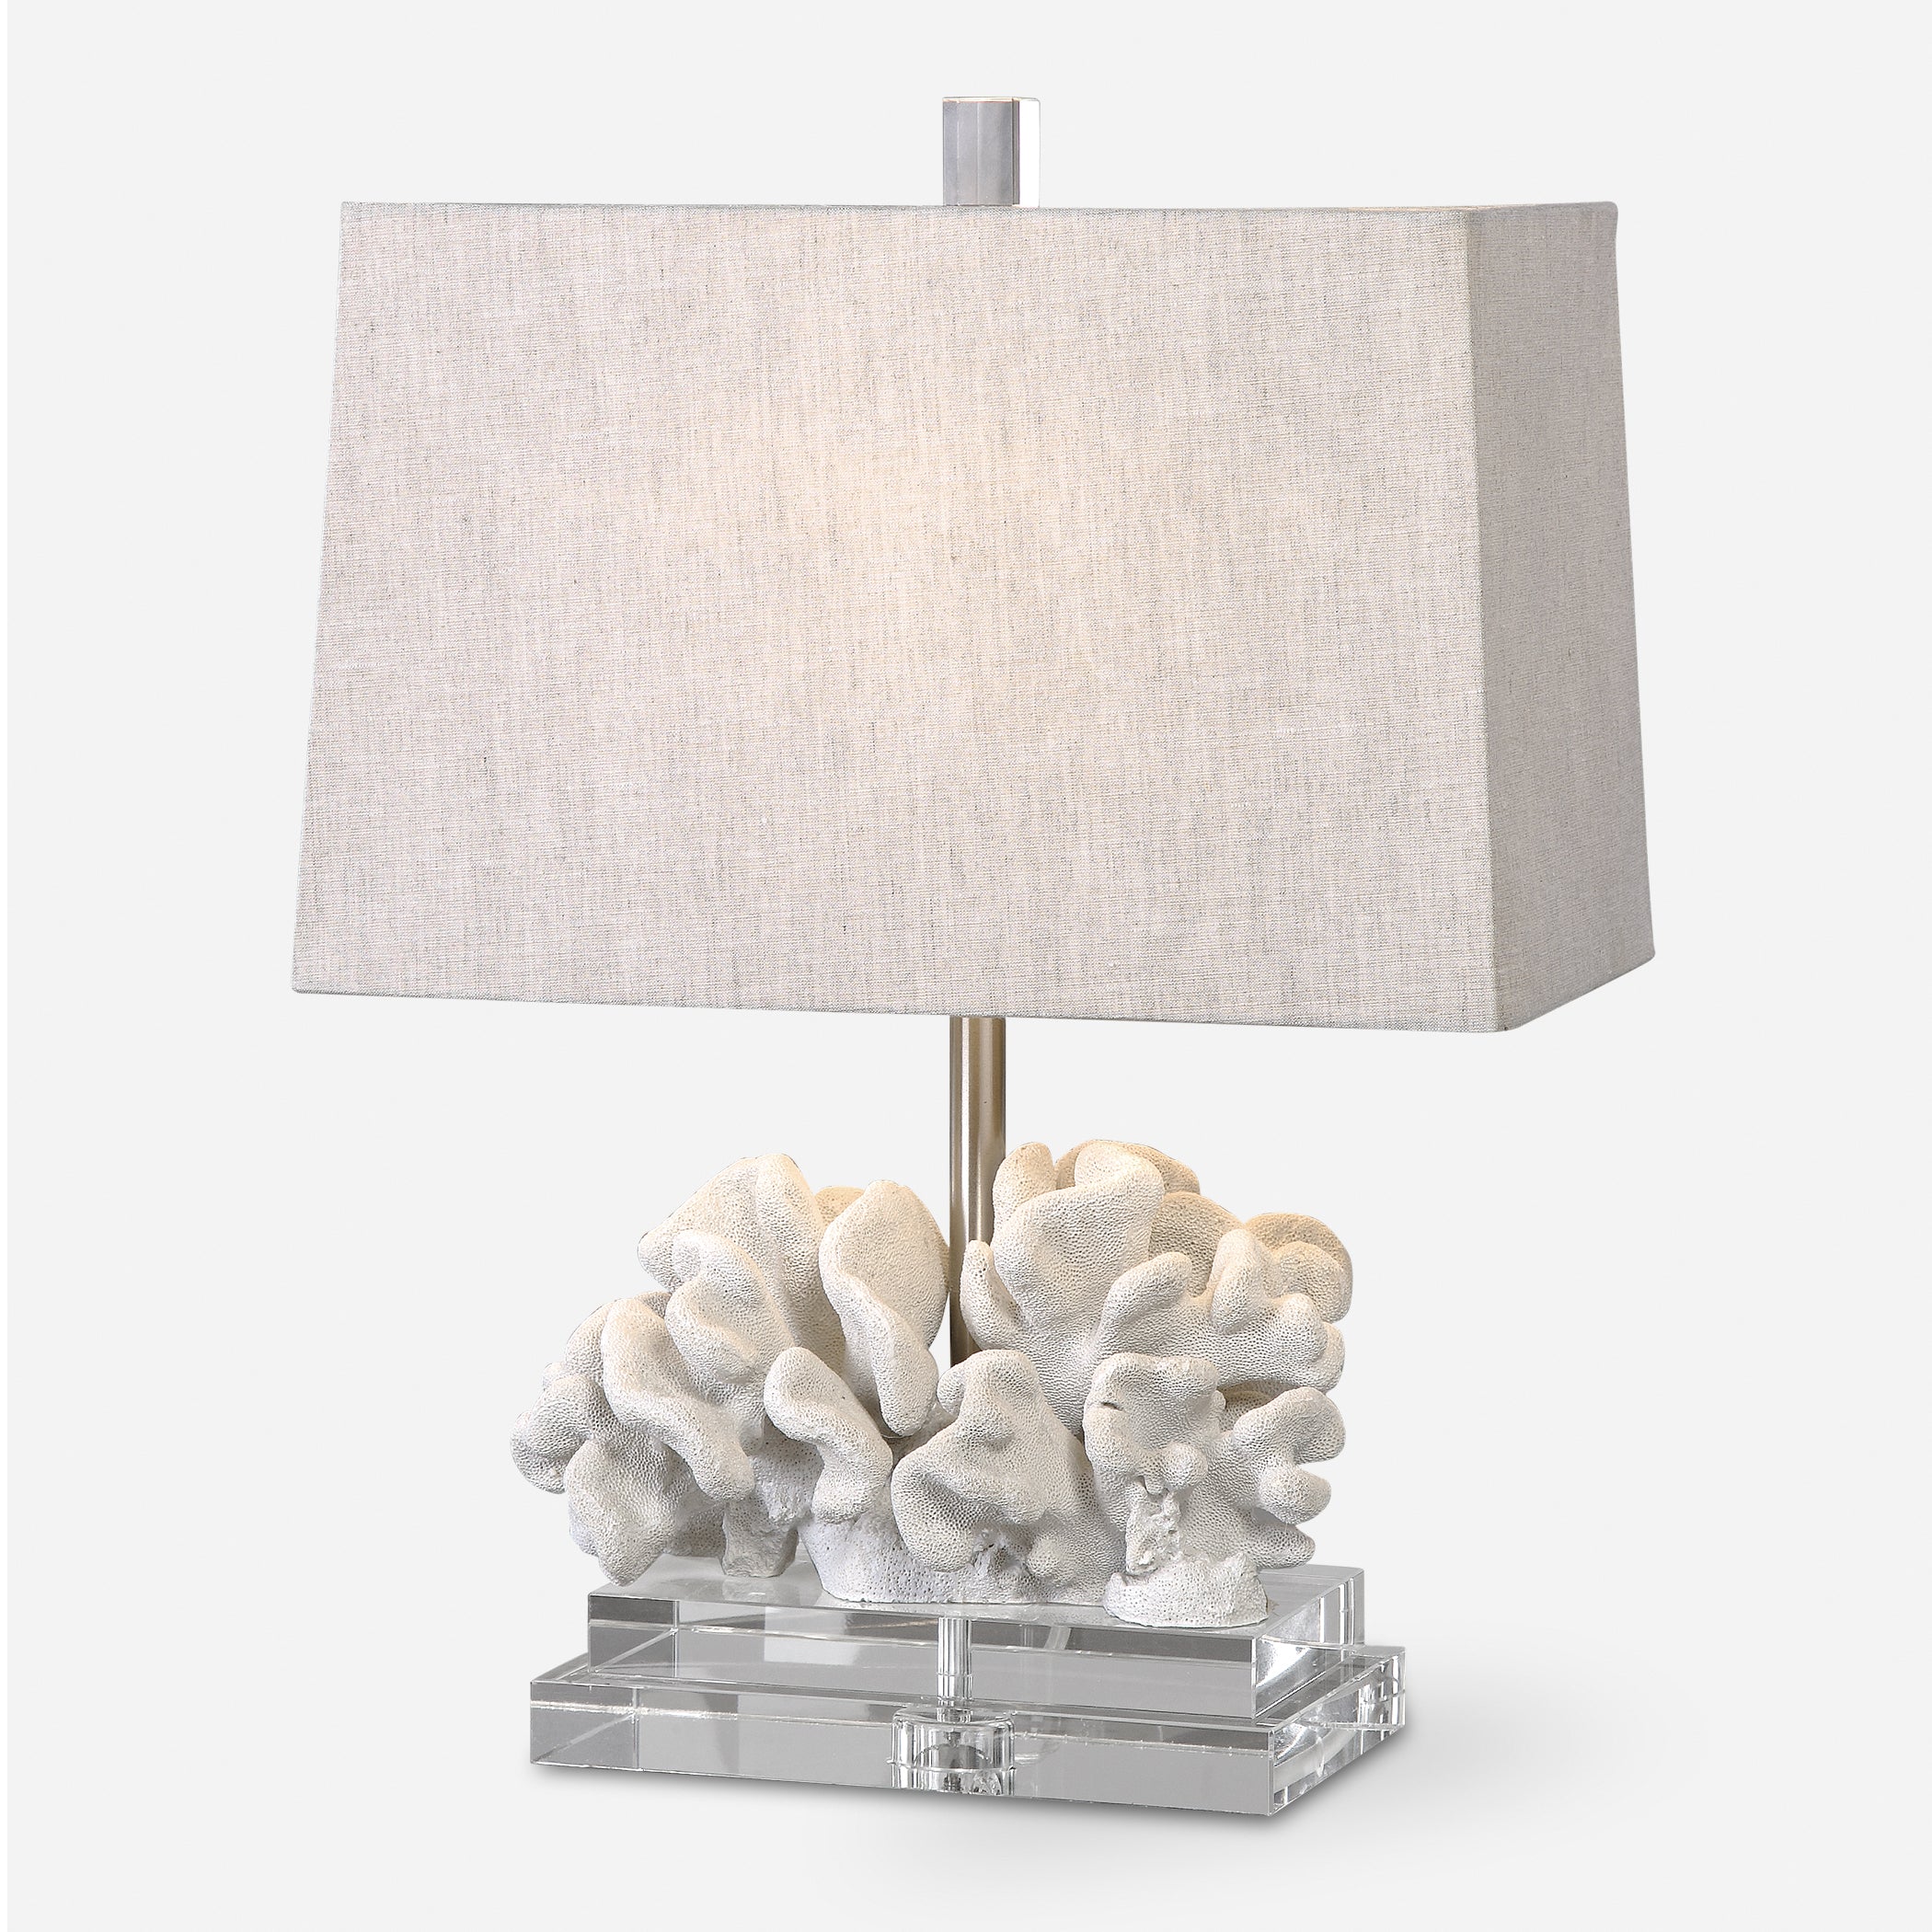 Uttermost Coral Coral Sculpture Table Lamp Coral Sculpture Table Lamp Uttermost   